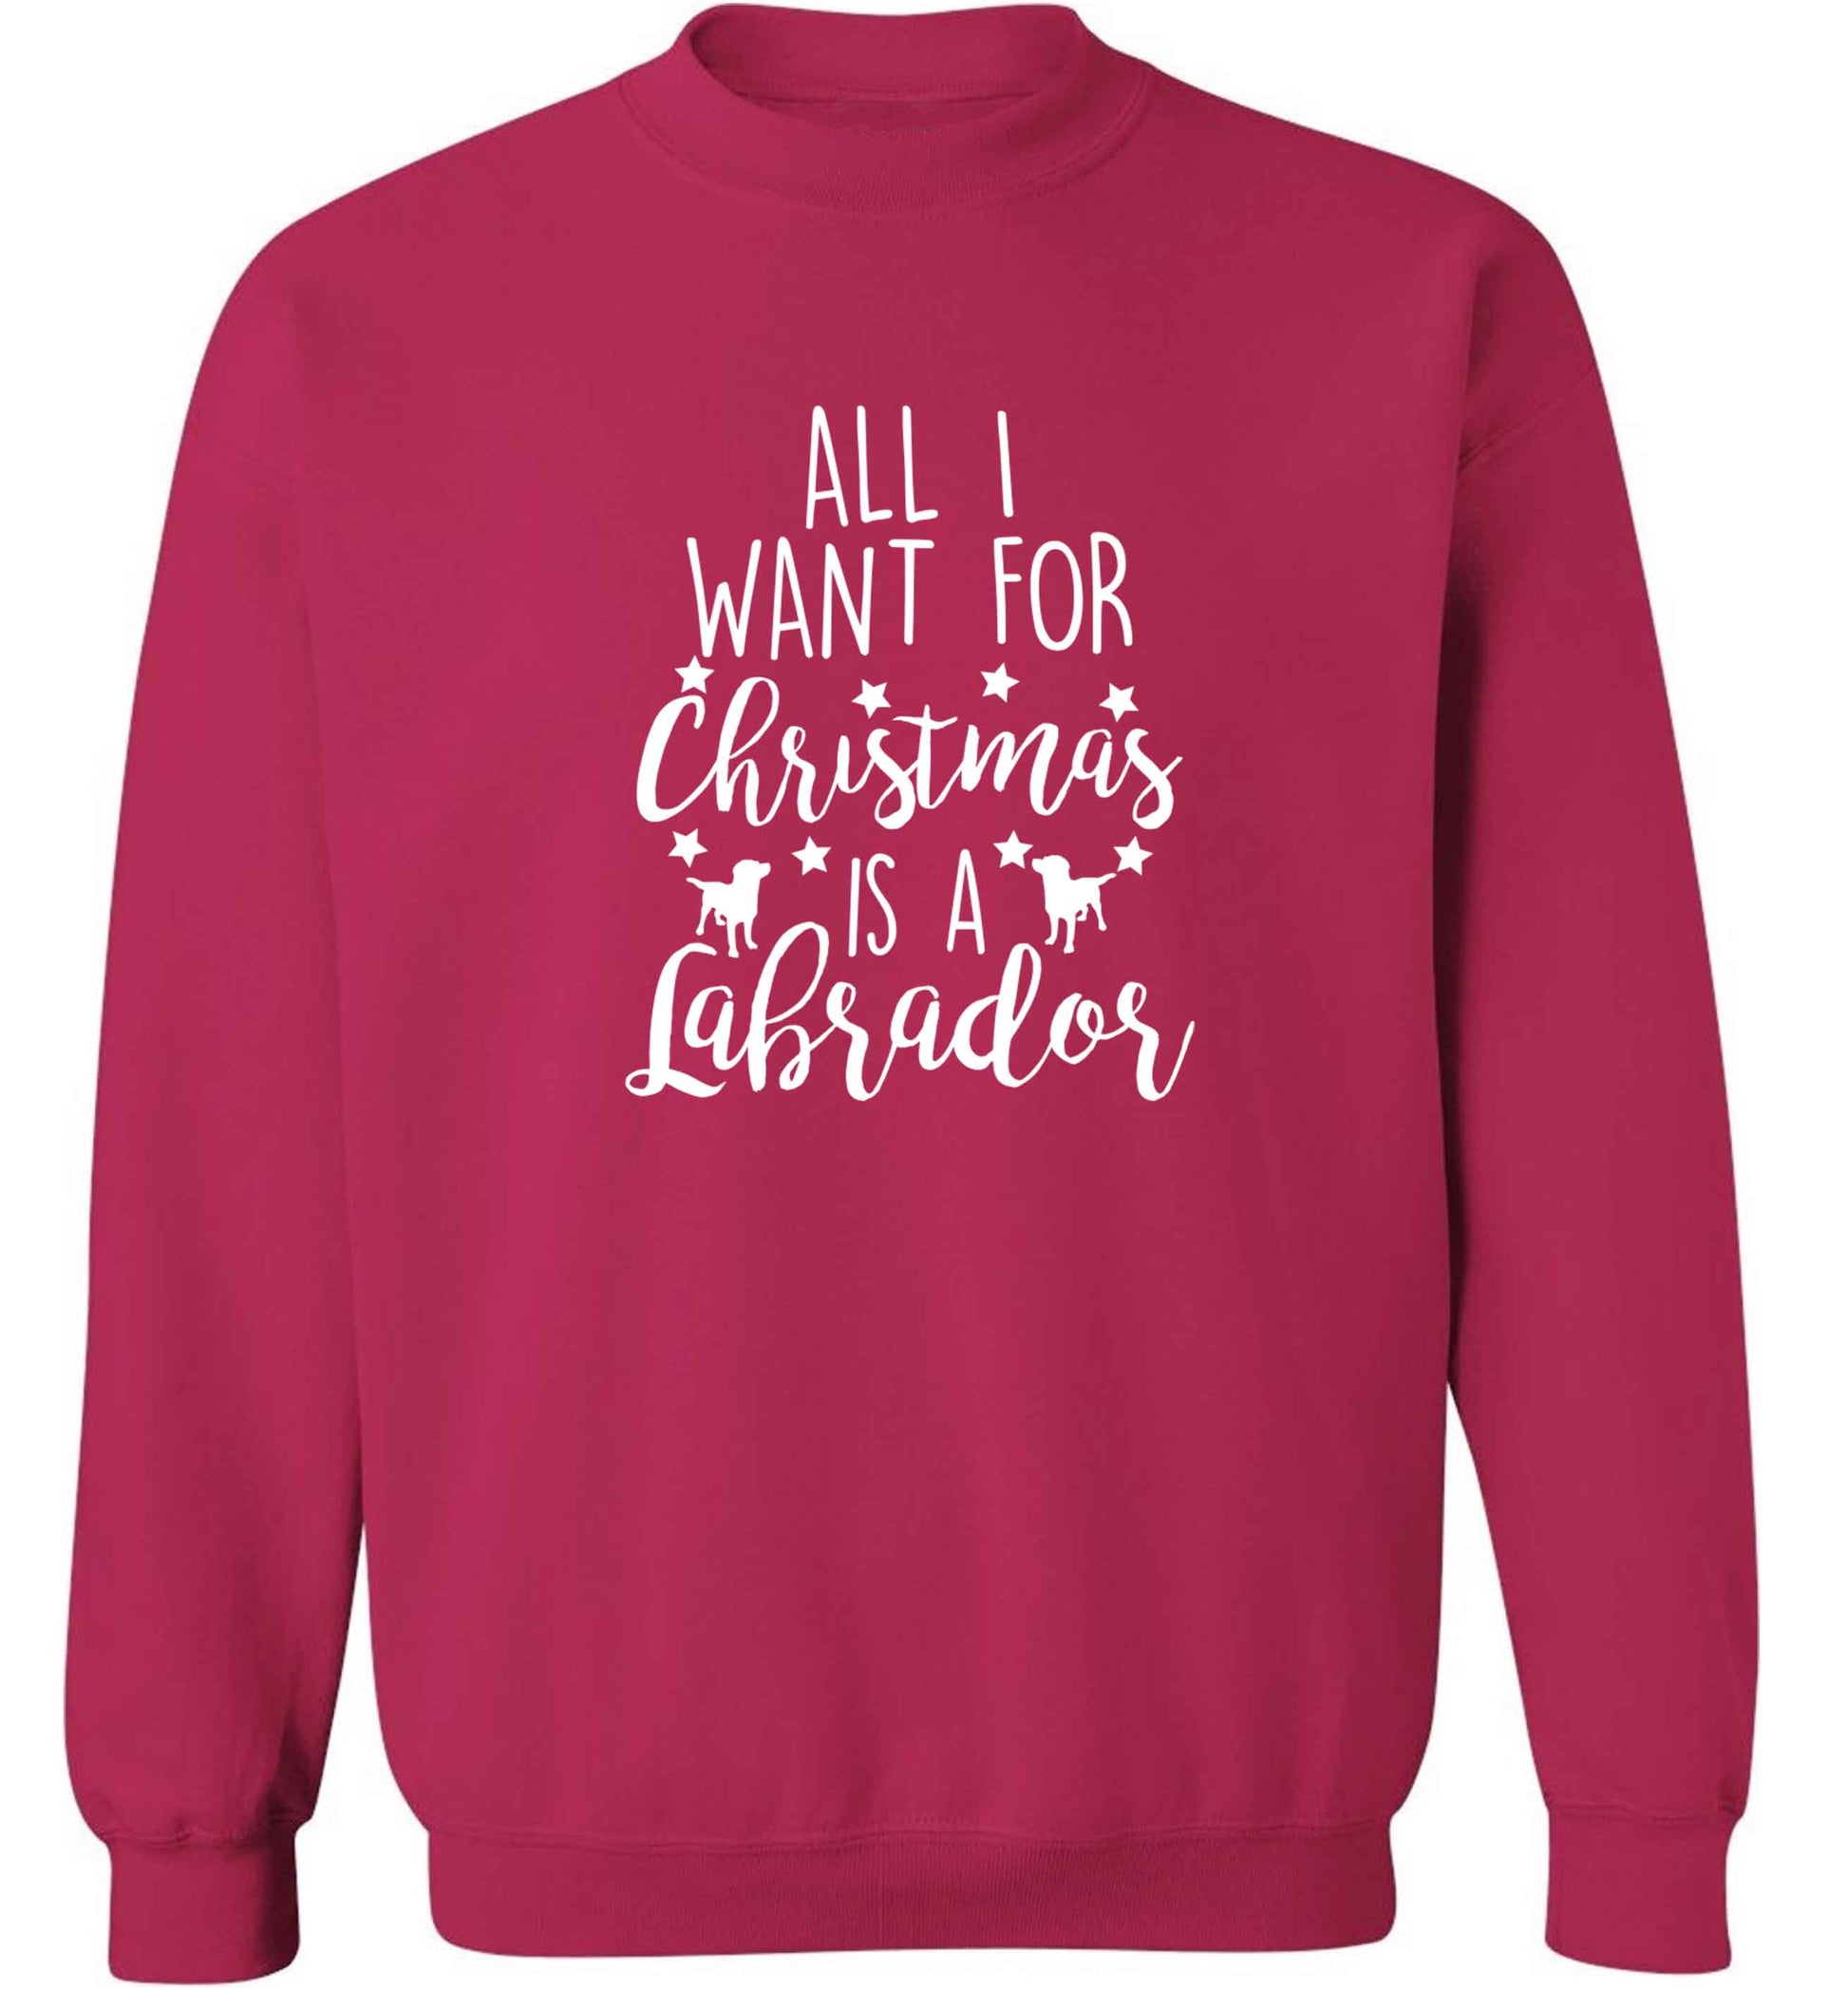 All I want for Christmas is a labrador adult's unisex pink sweater 2XL